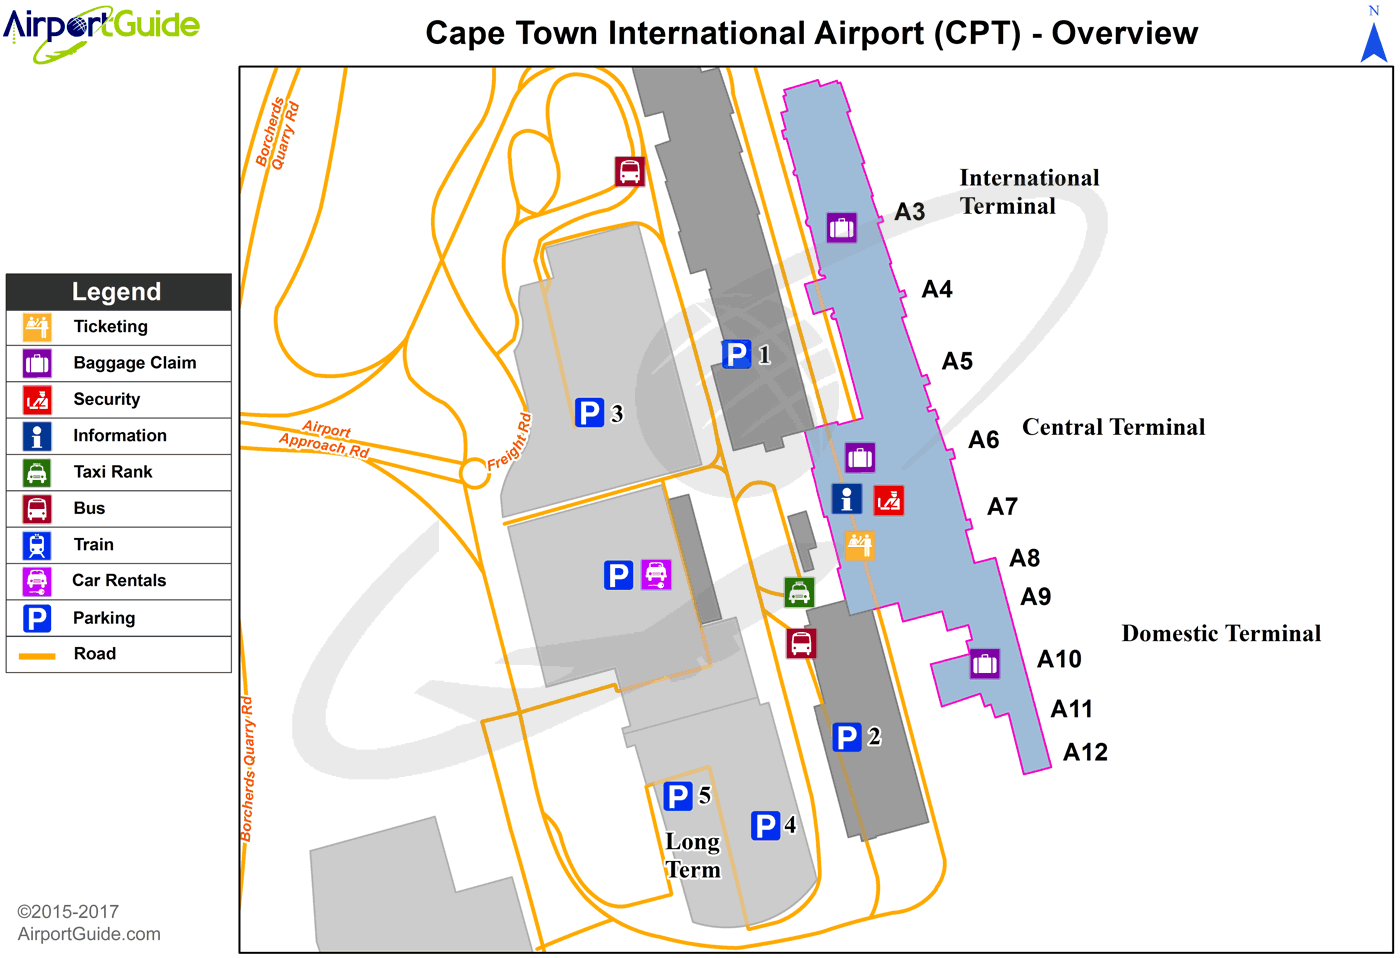 CPT Overview Map 